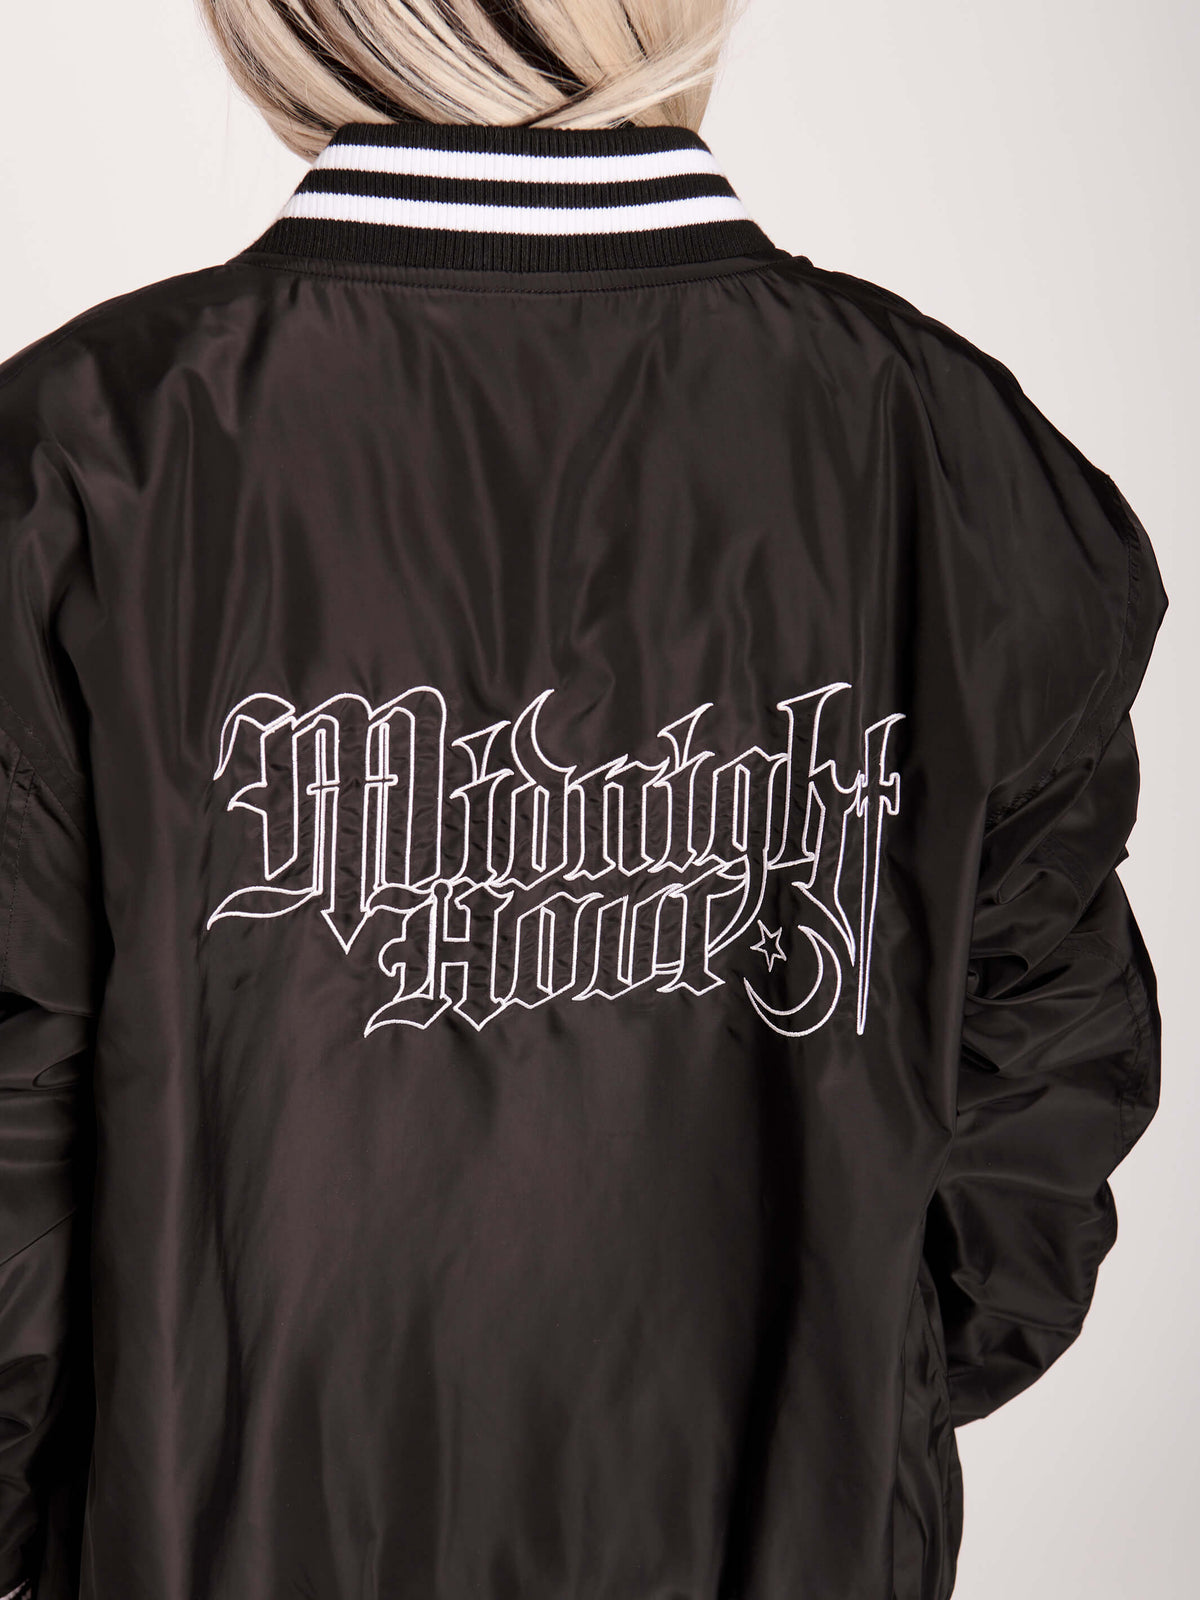 Stay warm in the dead of night with this embroidered Midnight Hour unisex boyfriend jacket. 100% Polyester with quilted lining. .bomber jacket, goth jacket, coffin, coffinprint, unisex, nu goth fashion, goth legging, goth grunge fashion, dark aesthetic clothing.